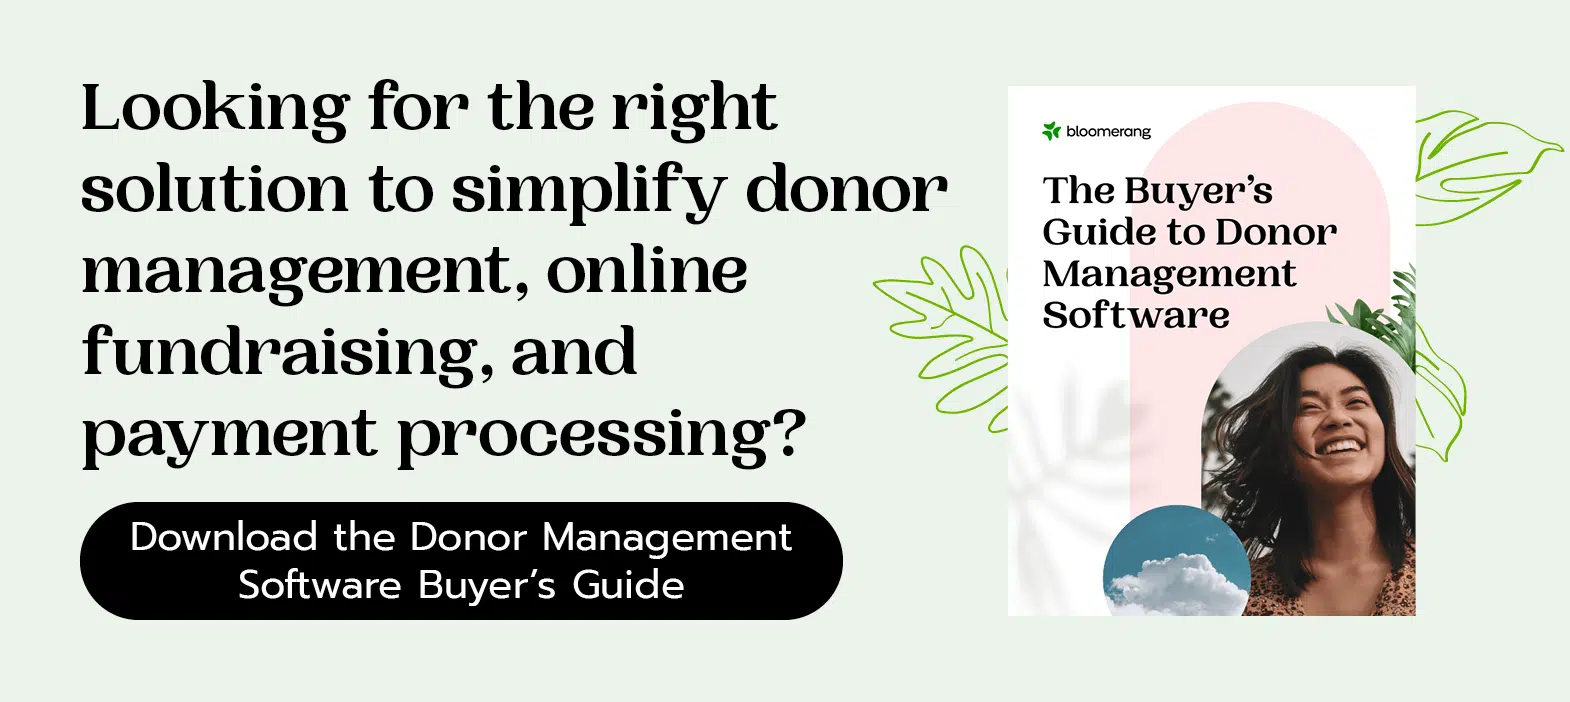 Optimize your fundraising efforts with a donor management system and built-in payment processor. Download the donor management software buyer’s guide here.